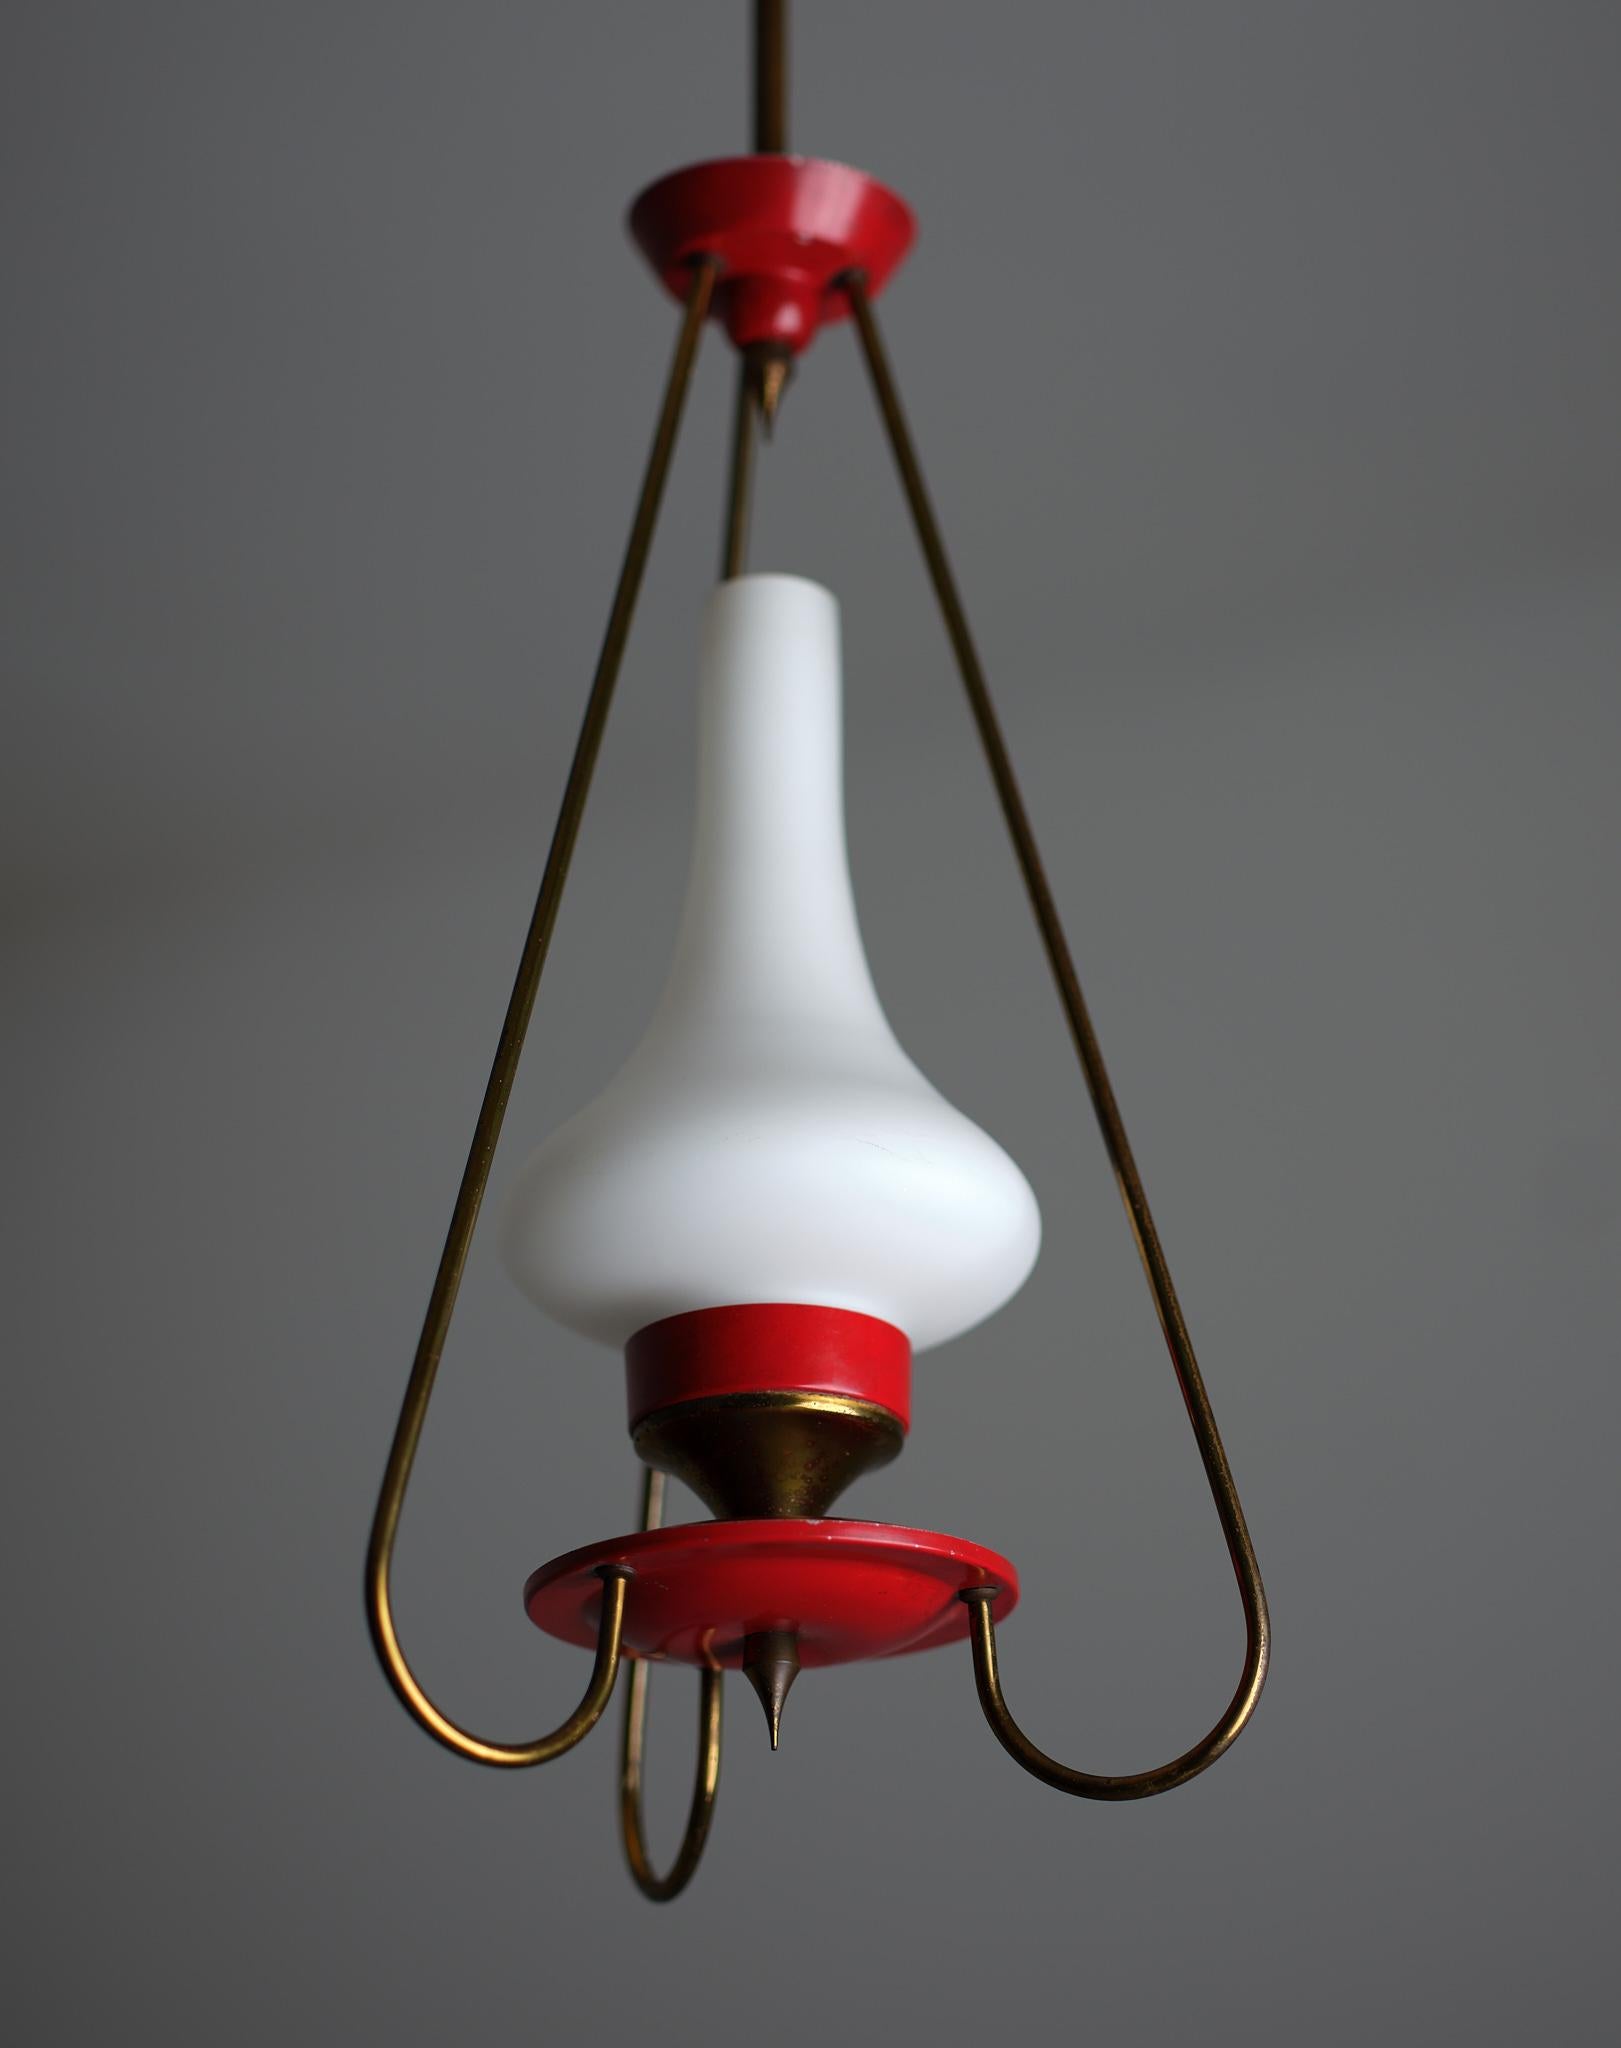 Italian pendant chandelier with three arms, made with red enameled metal , brass and opaline glass .


Elegant and modern design , typical of Italian lightings of the 1950s

 standard E27 bulbs.
upon request we can change the height of the